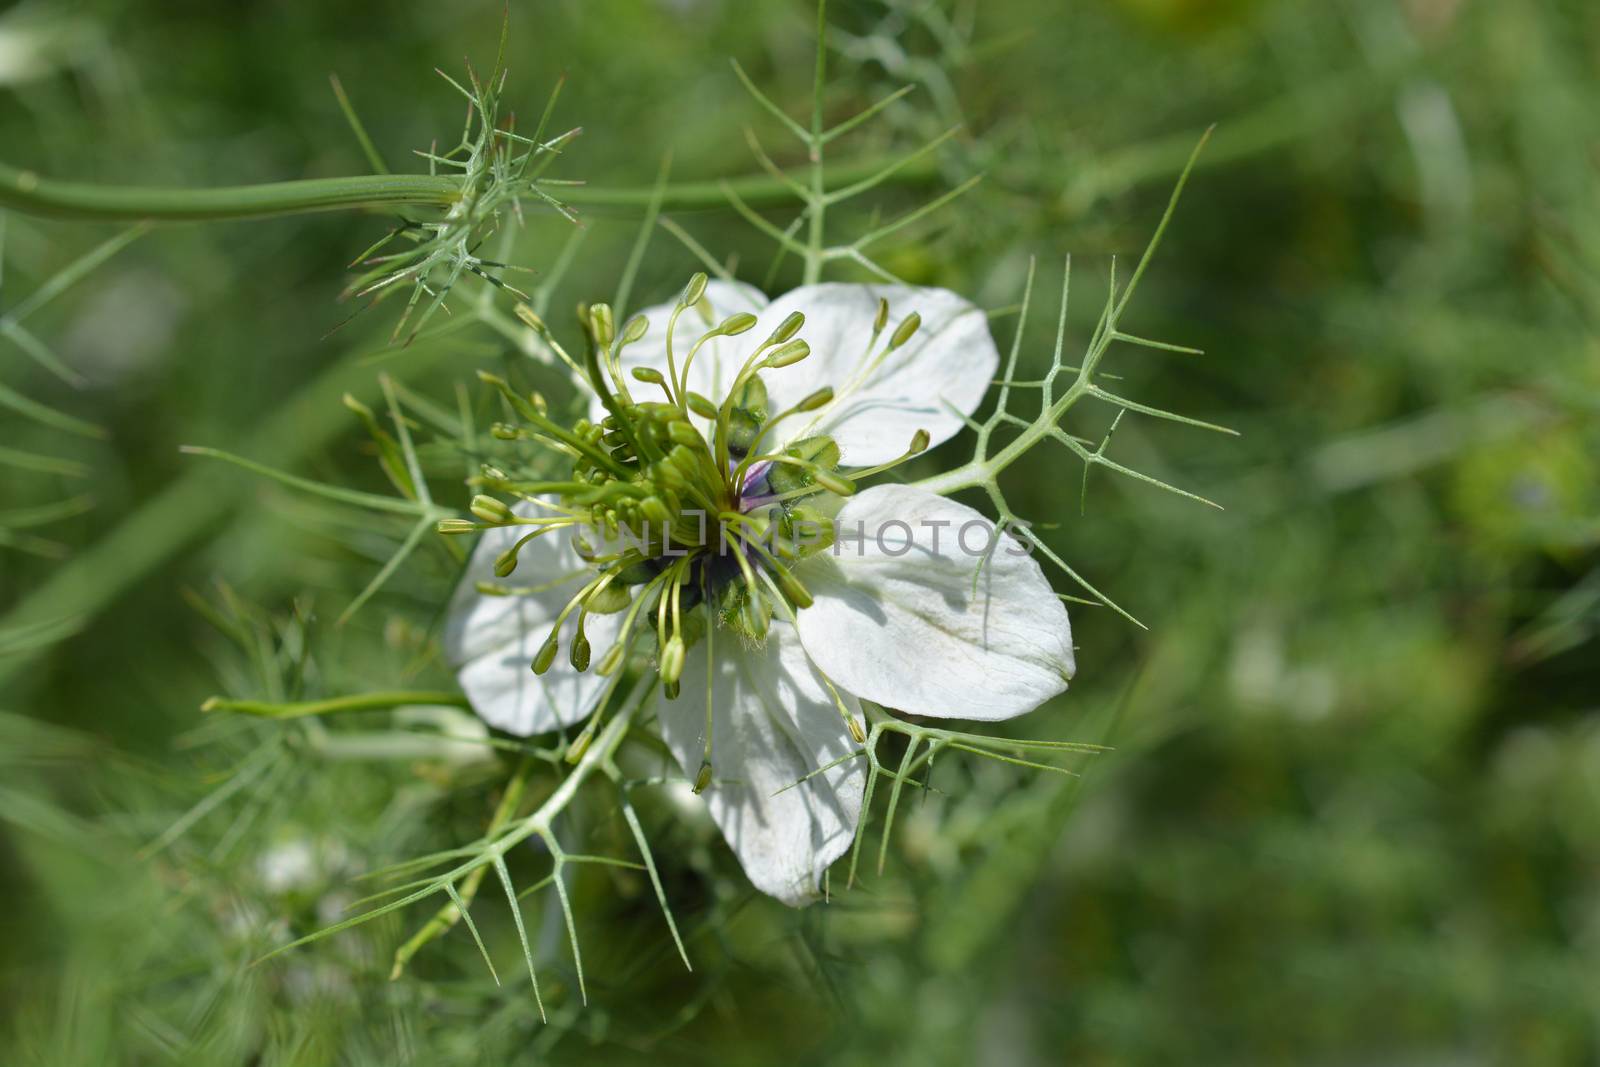 Love-in-a-mist flower by nahhan